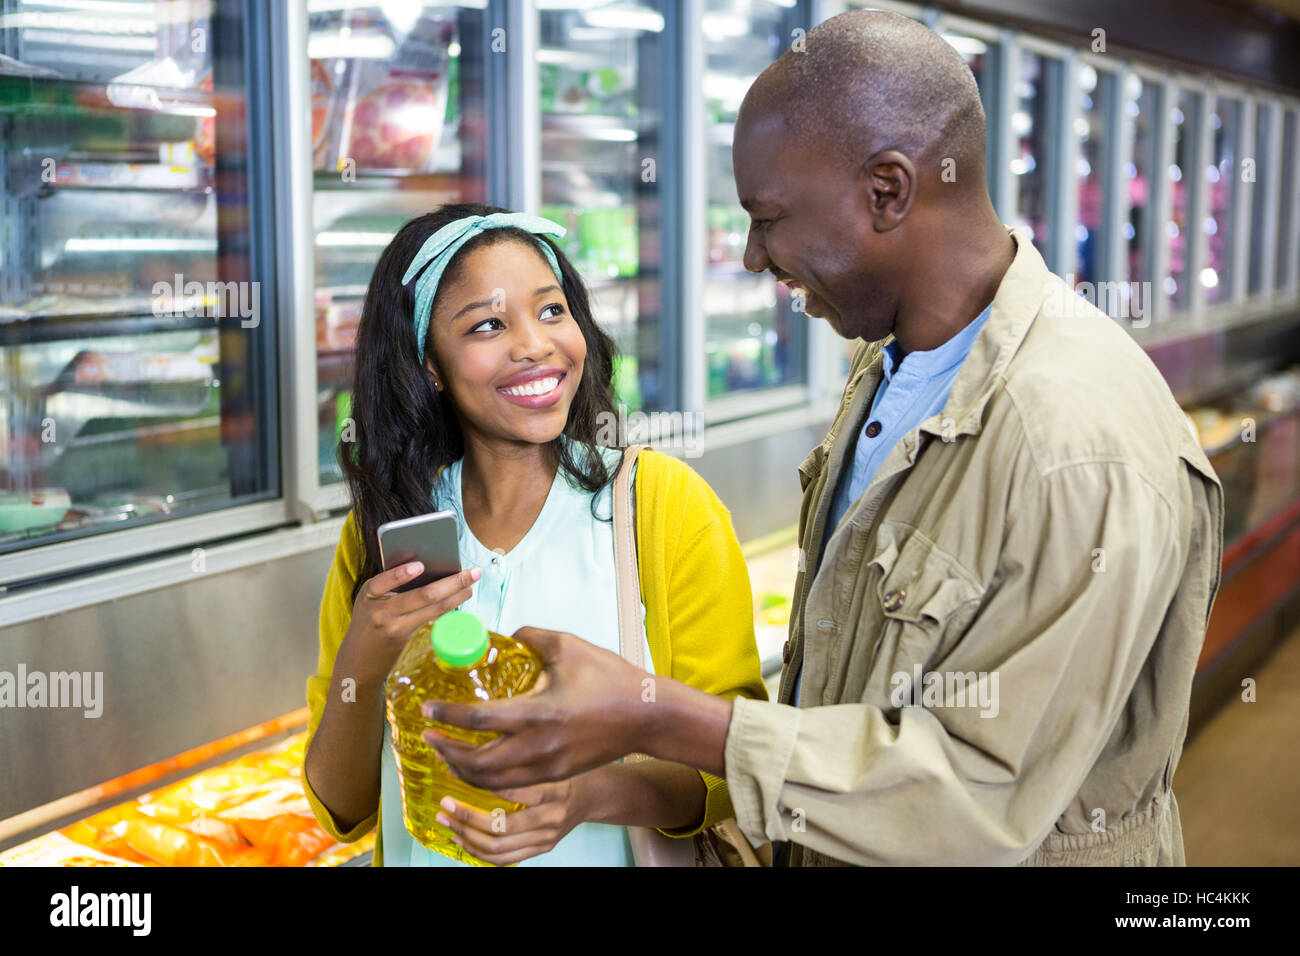 Smiling couple shopping in grocery section Stock Photo